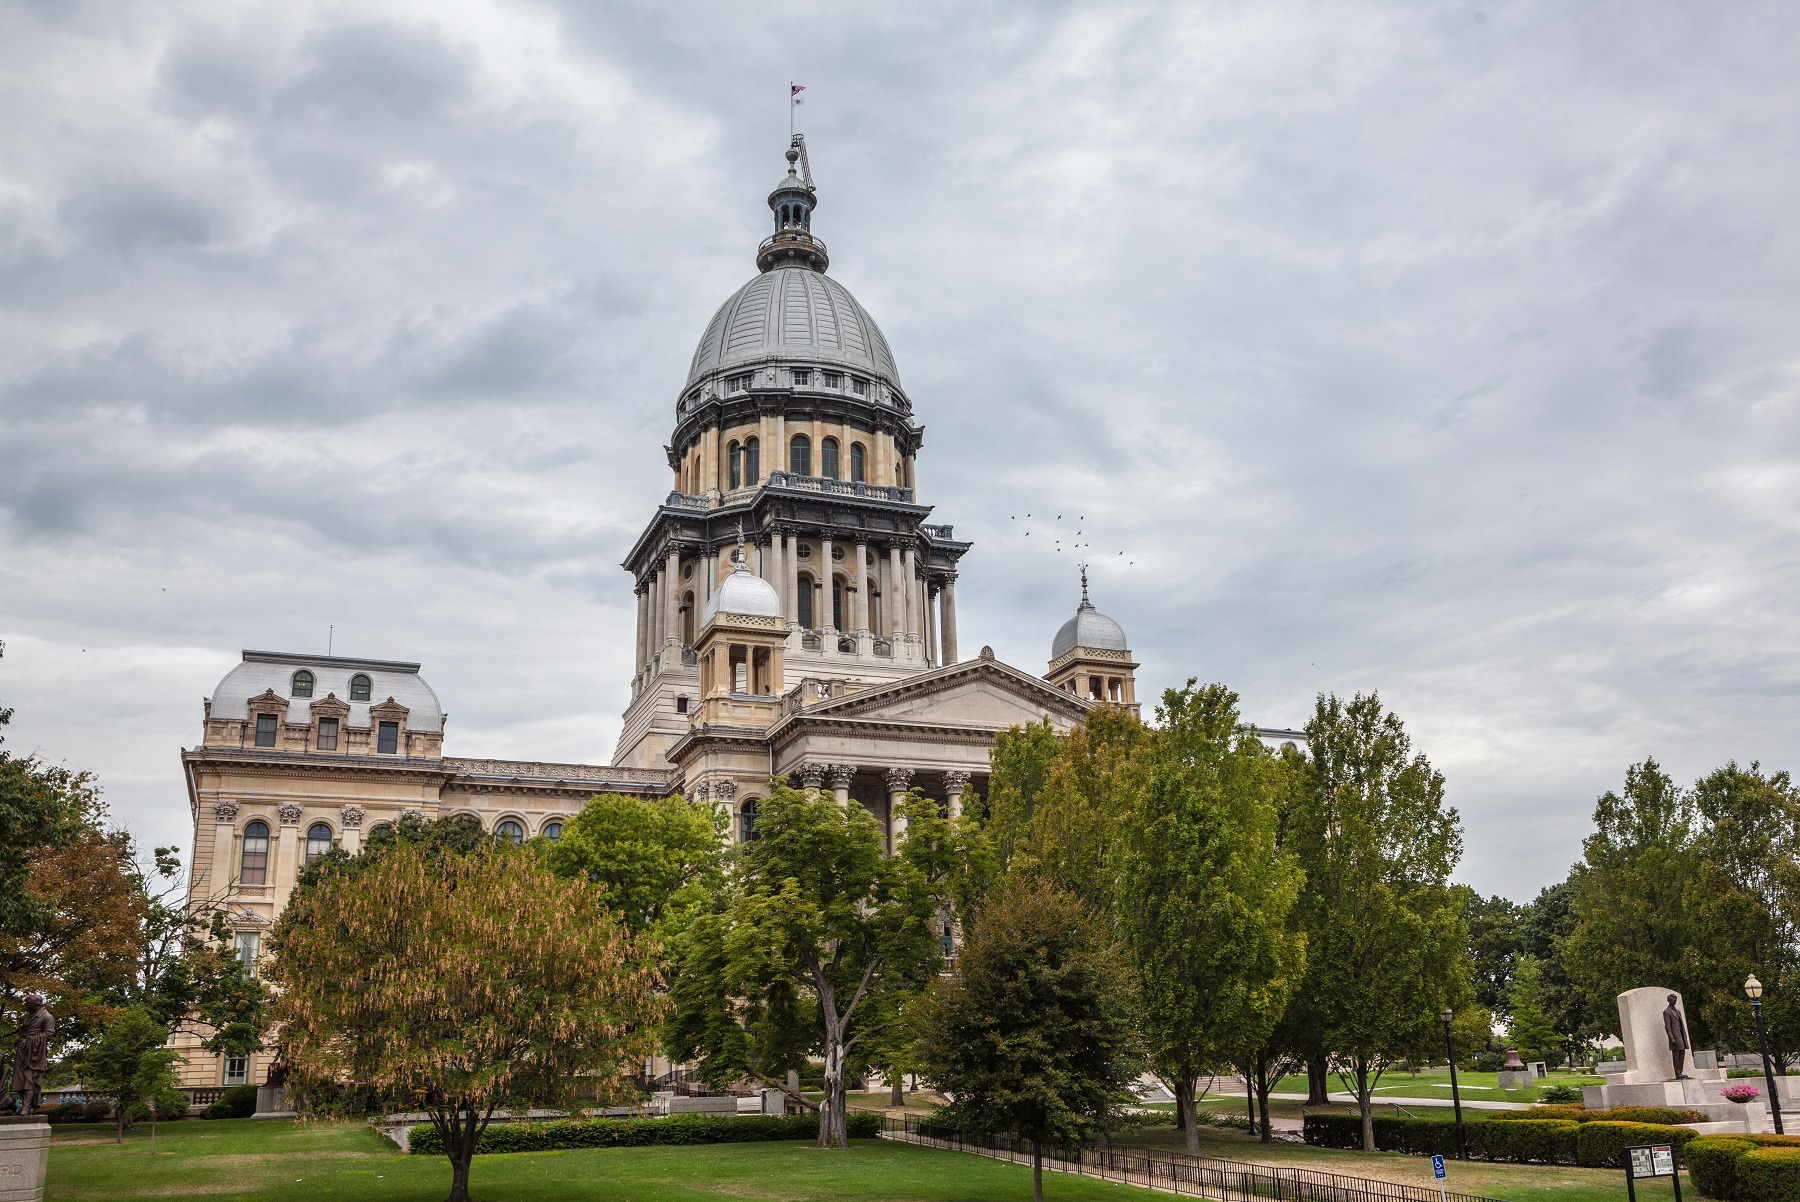 Illinois State House and Capitol Building in Springfield, IL